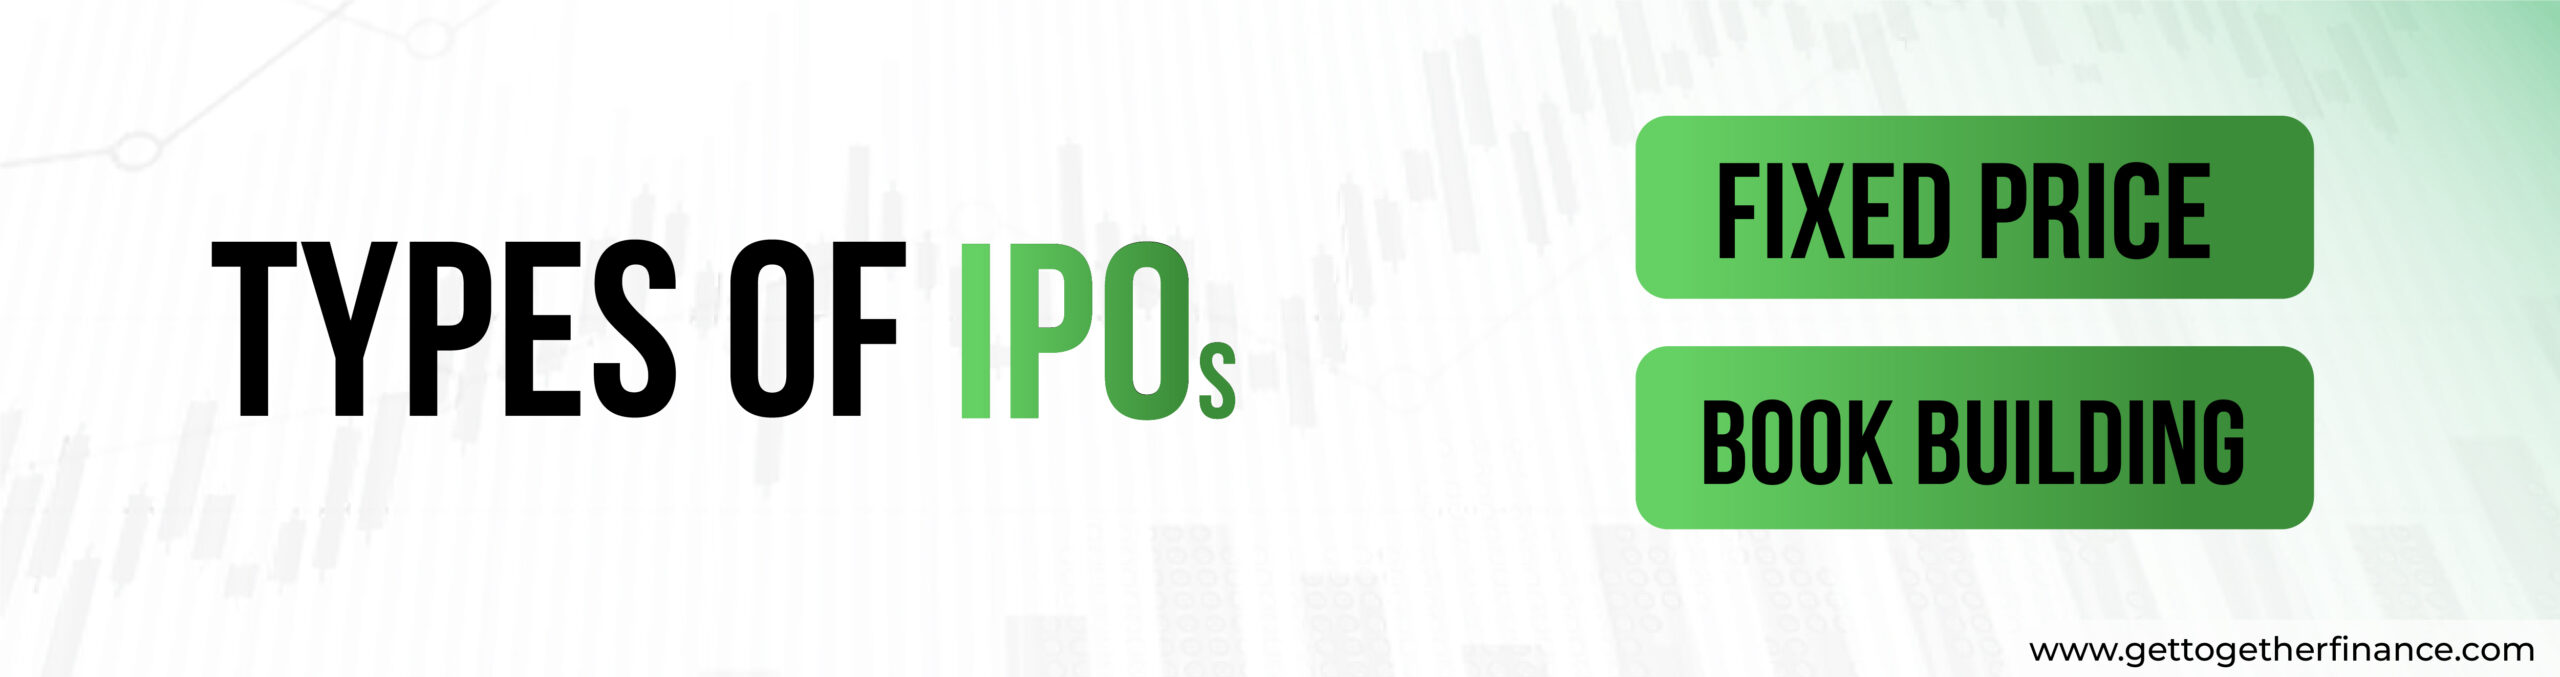 types of IPOs